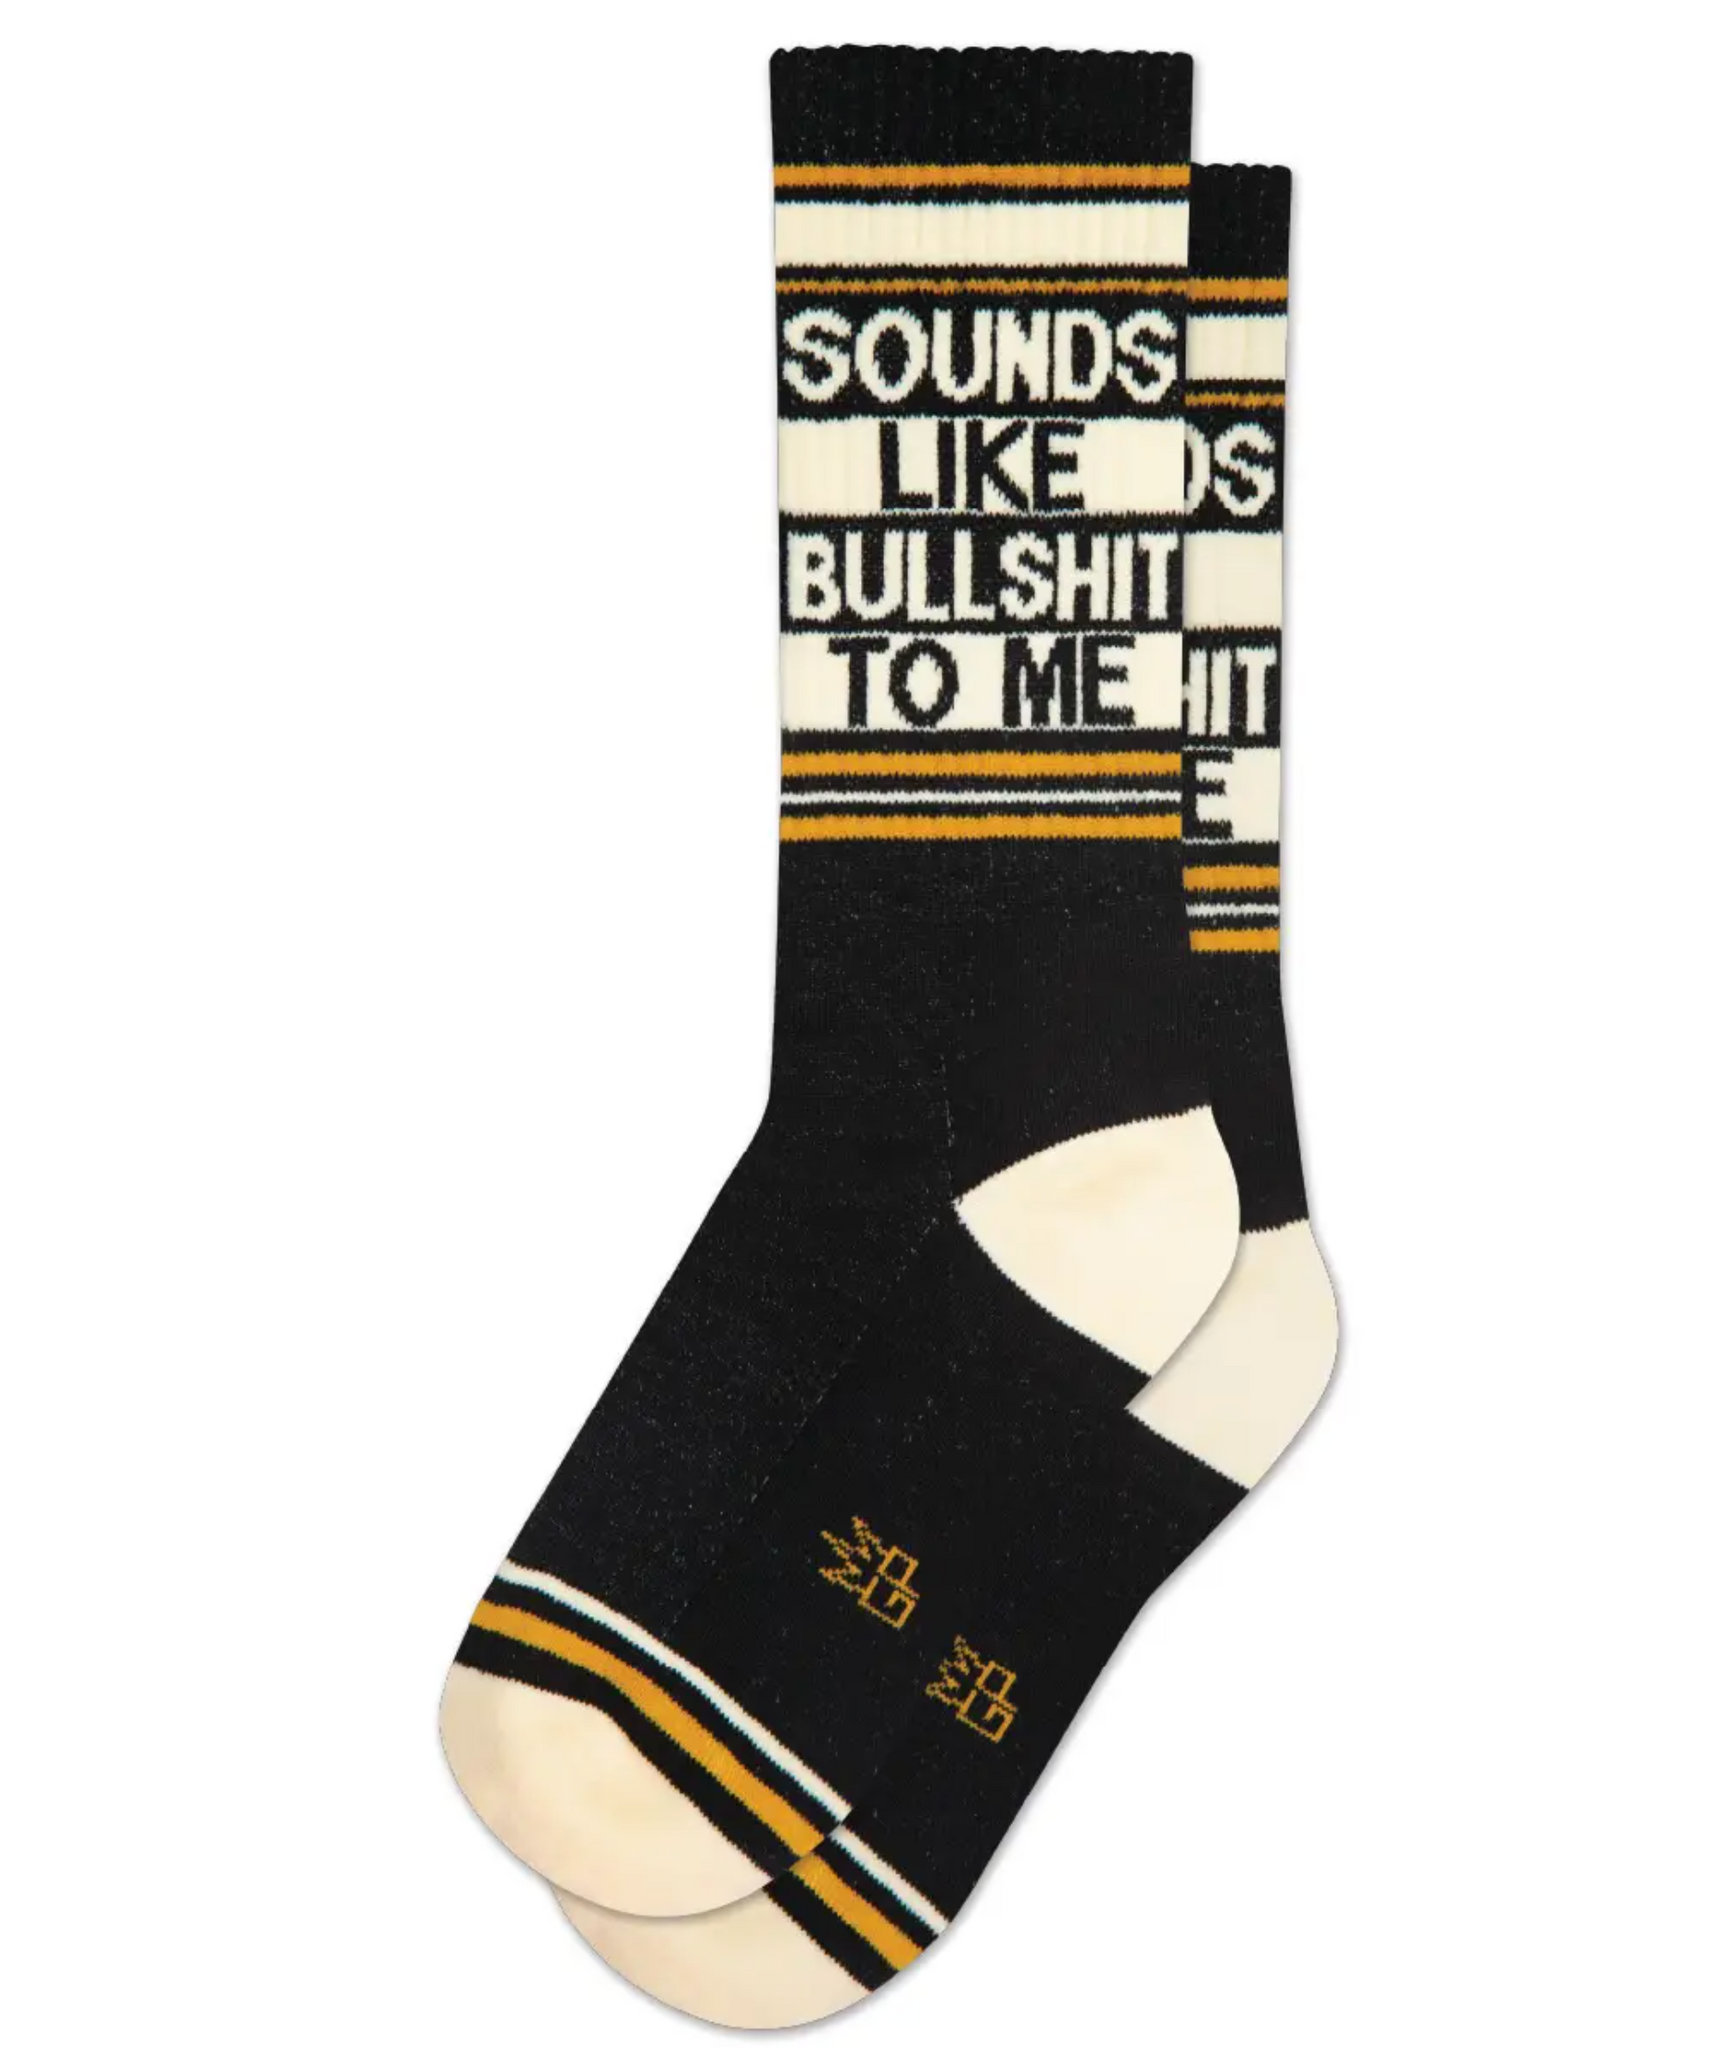 Sounds Like Bullshit To Me Unisex Gym Socks by Gumball Poodle Sold At Le Monkey House